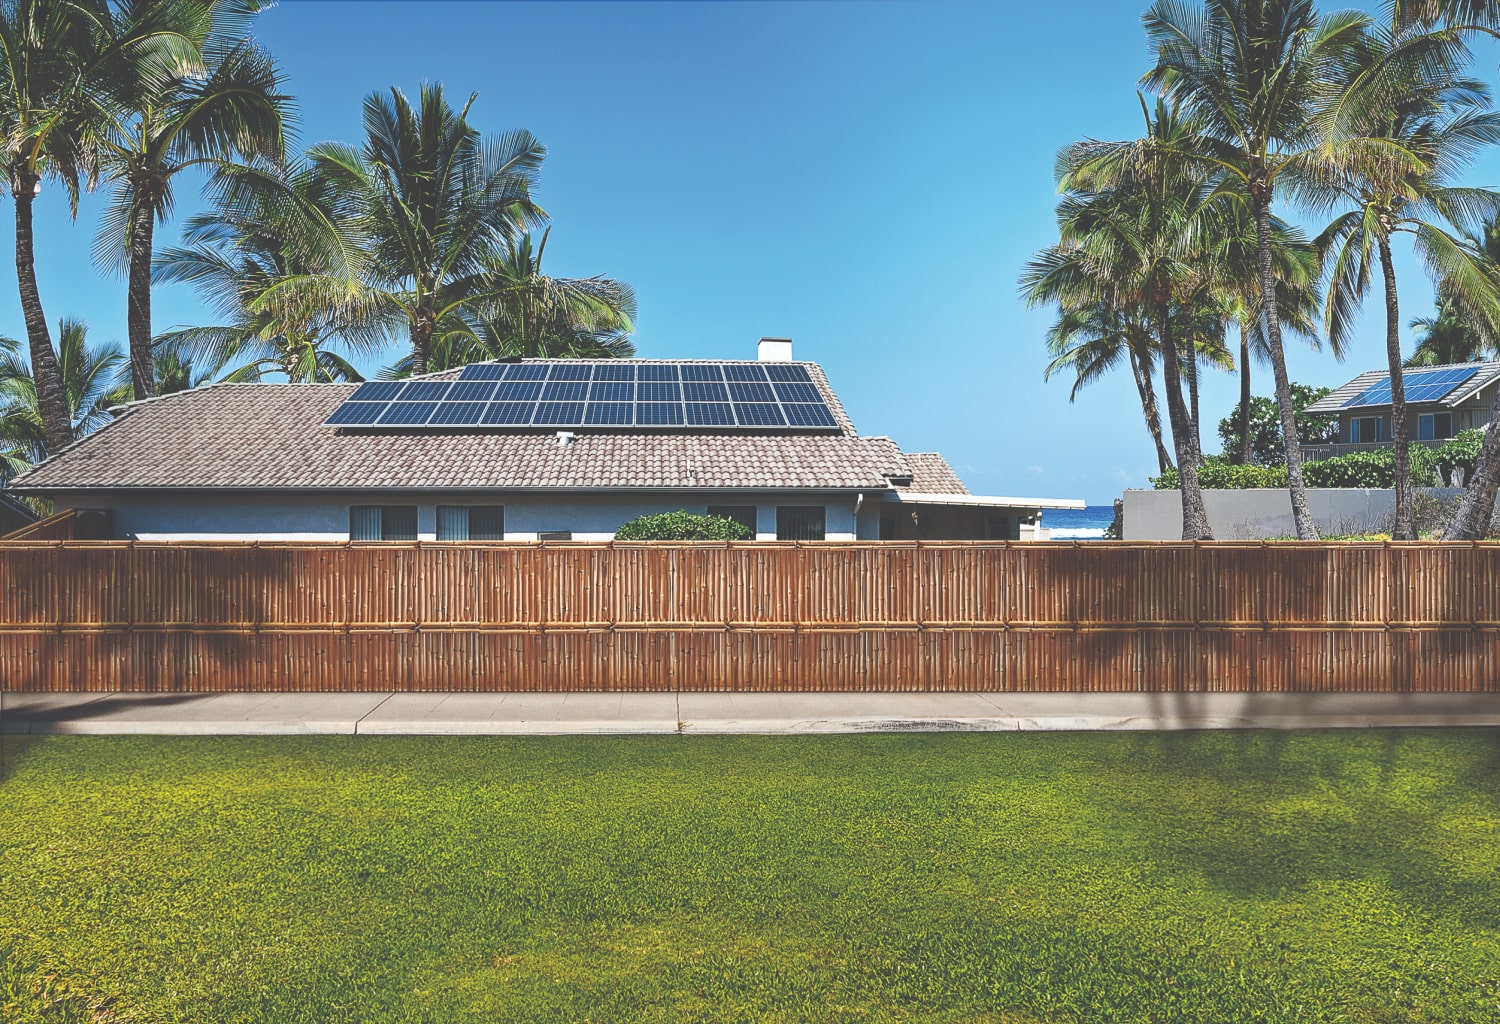 Home in Hawaii with solar on roof